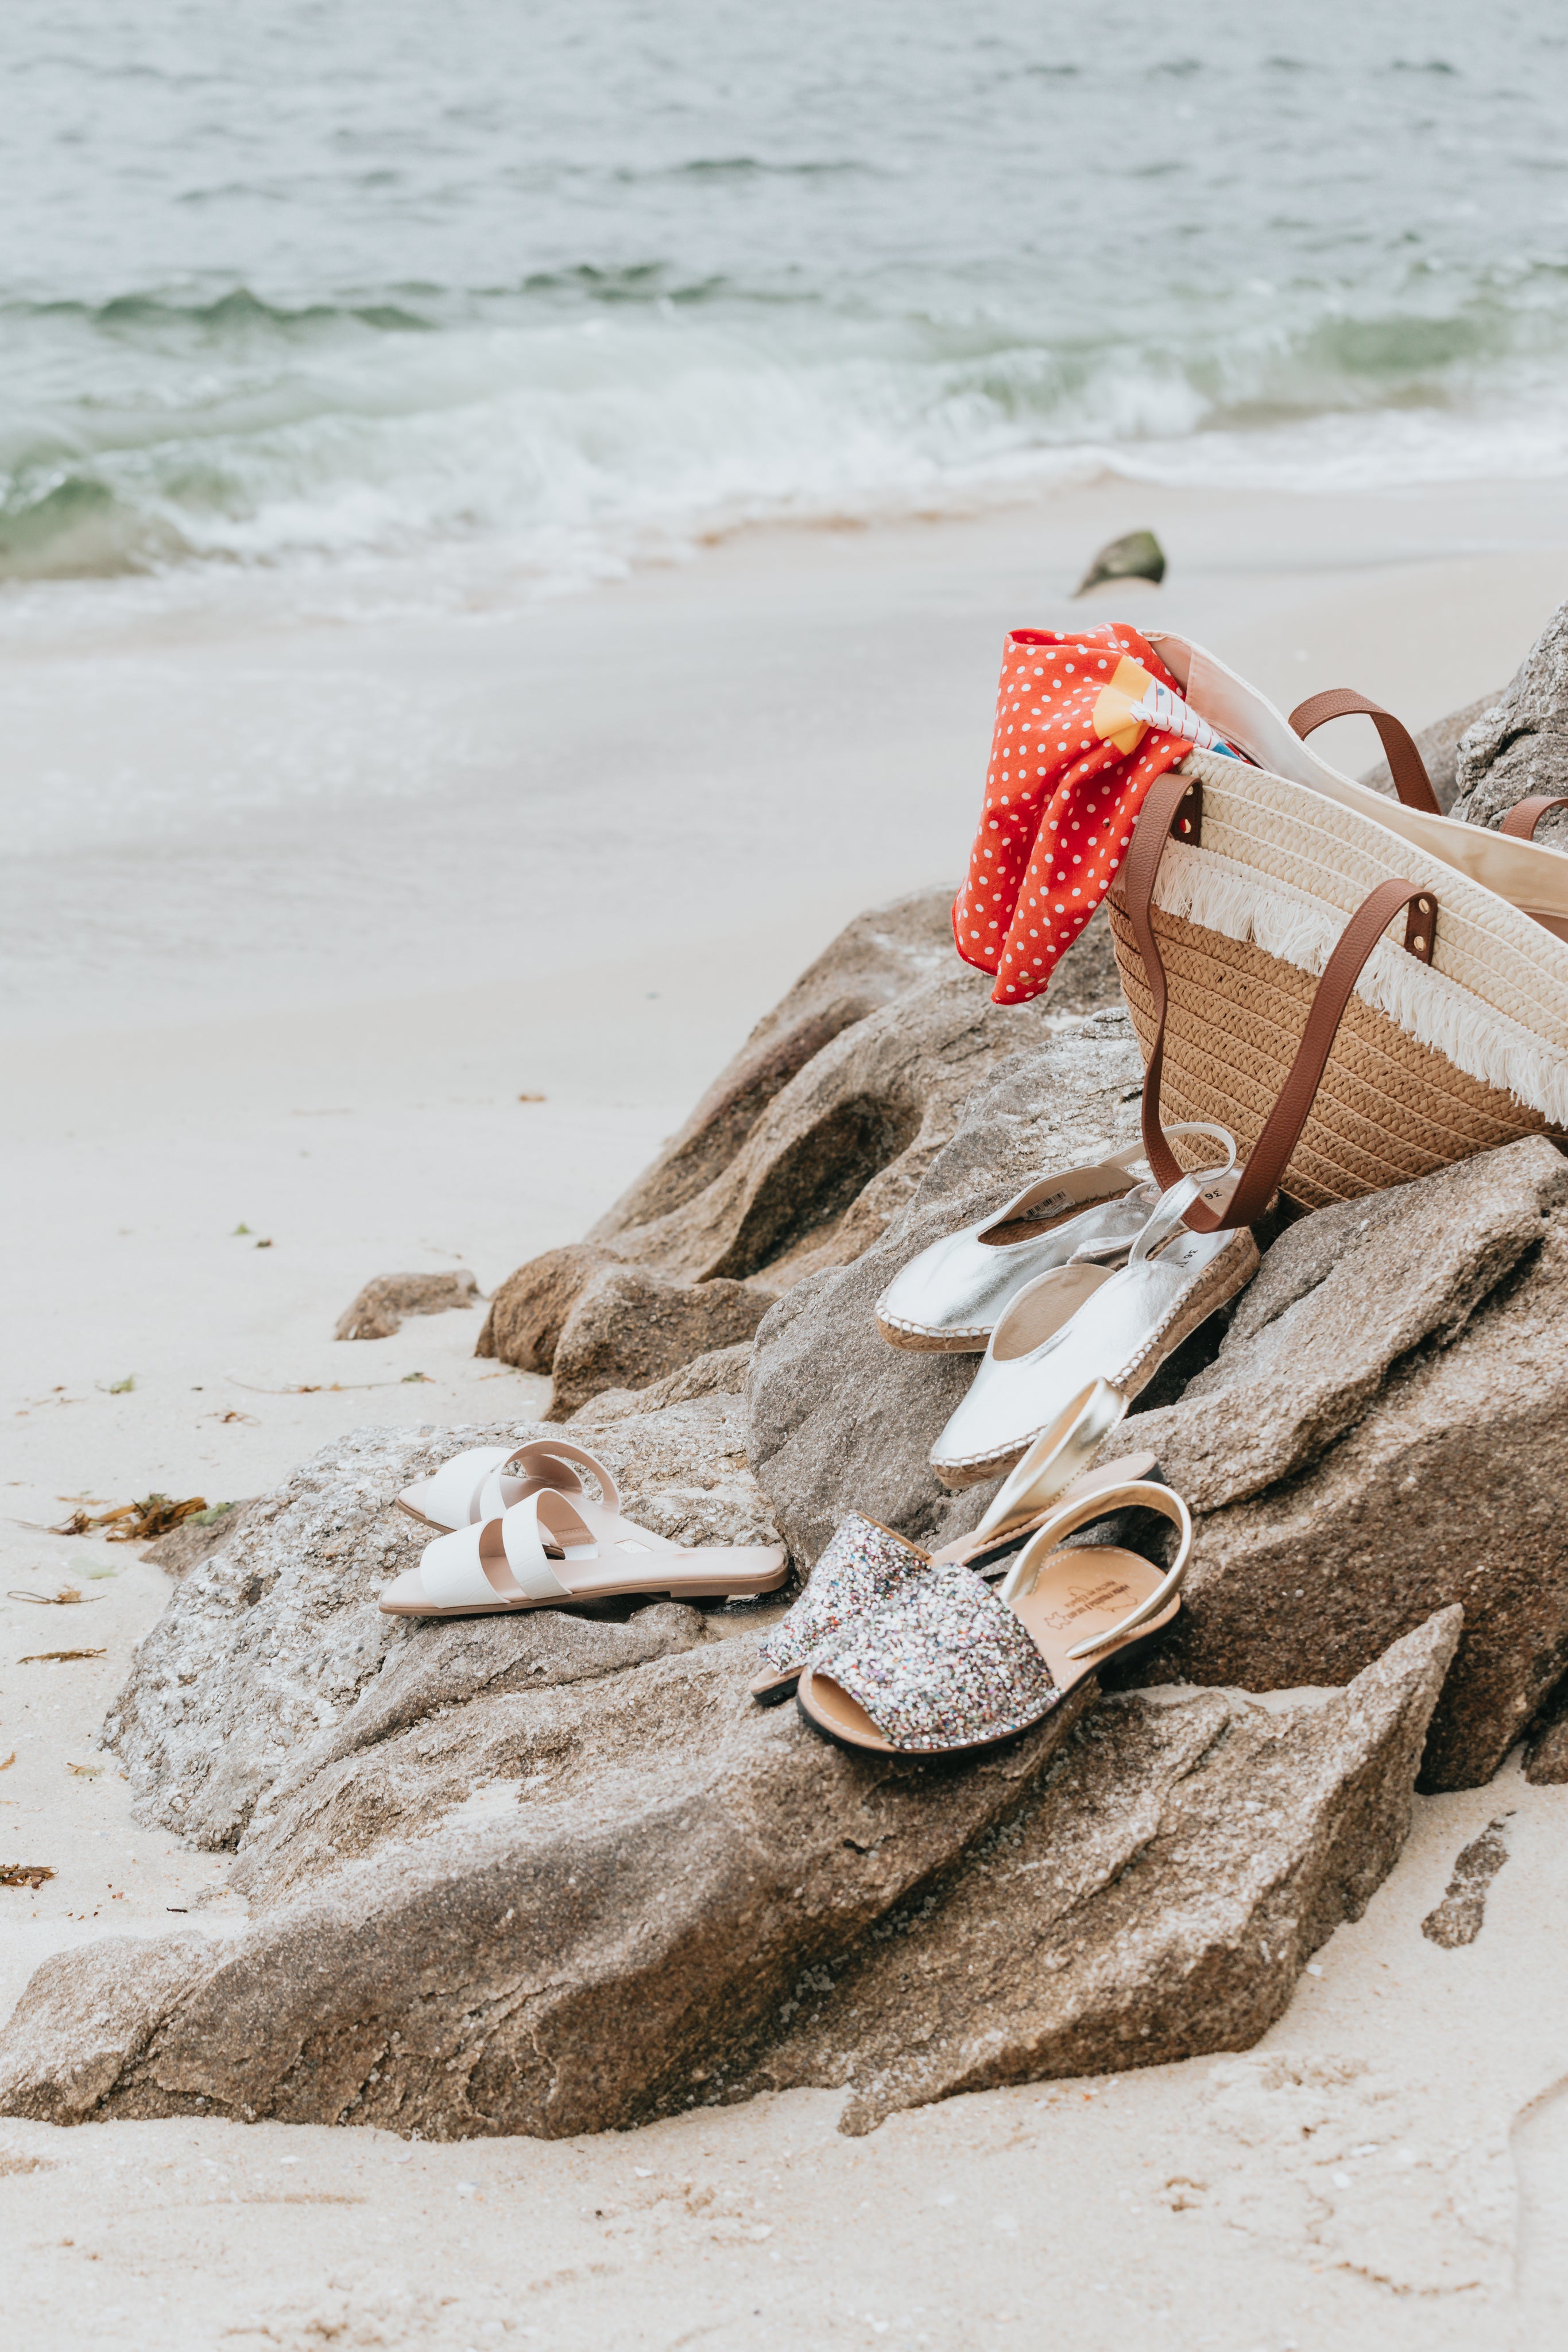 Three pairs of summer shoes sit on top of the rocks on a sandy beach with a wicker beach bag behind them.